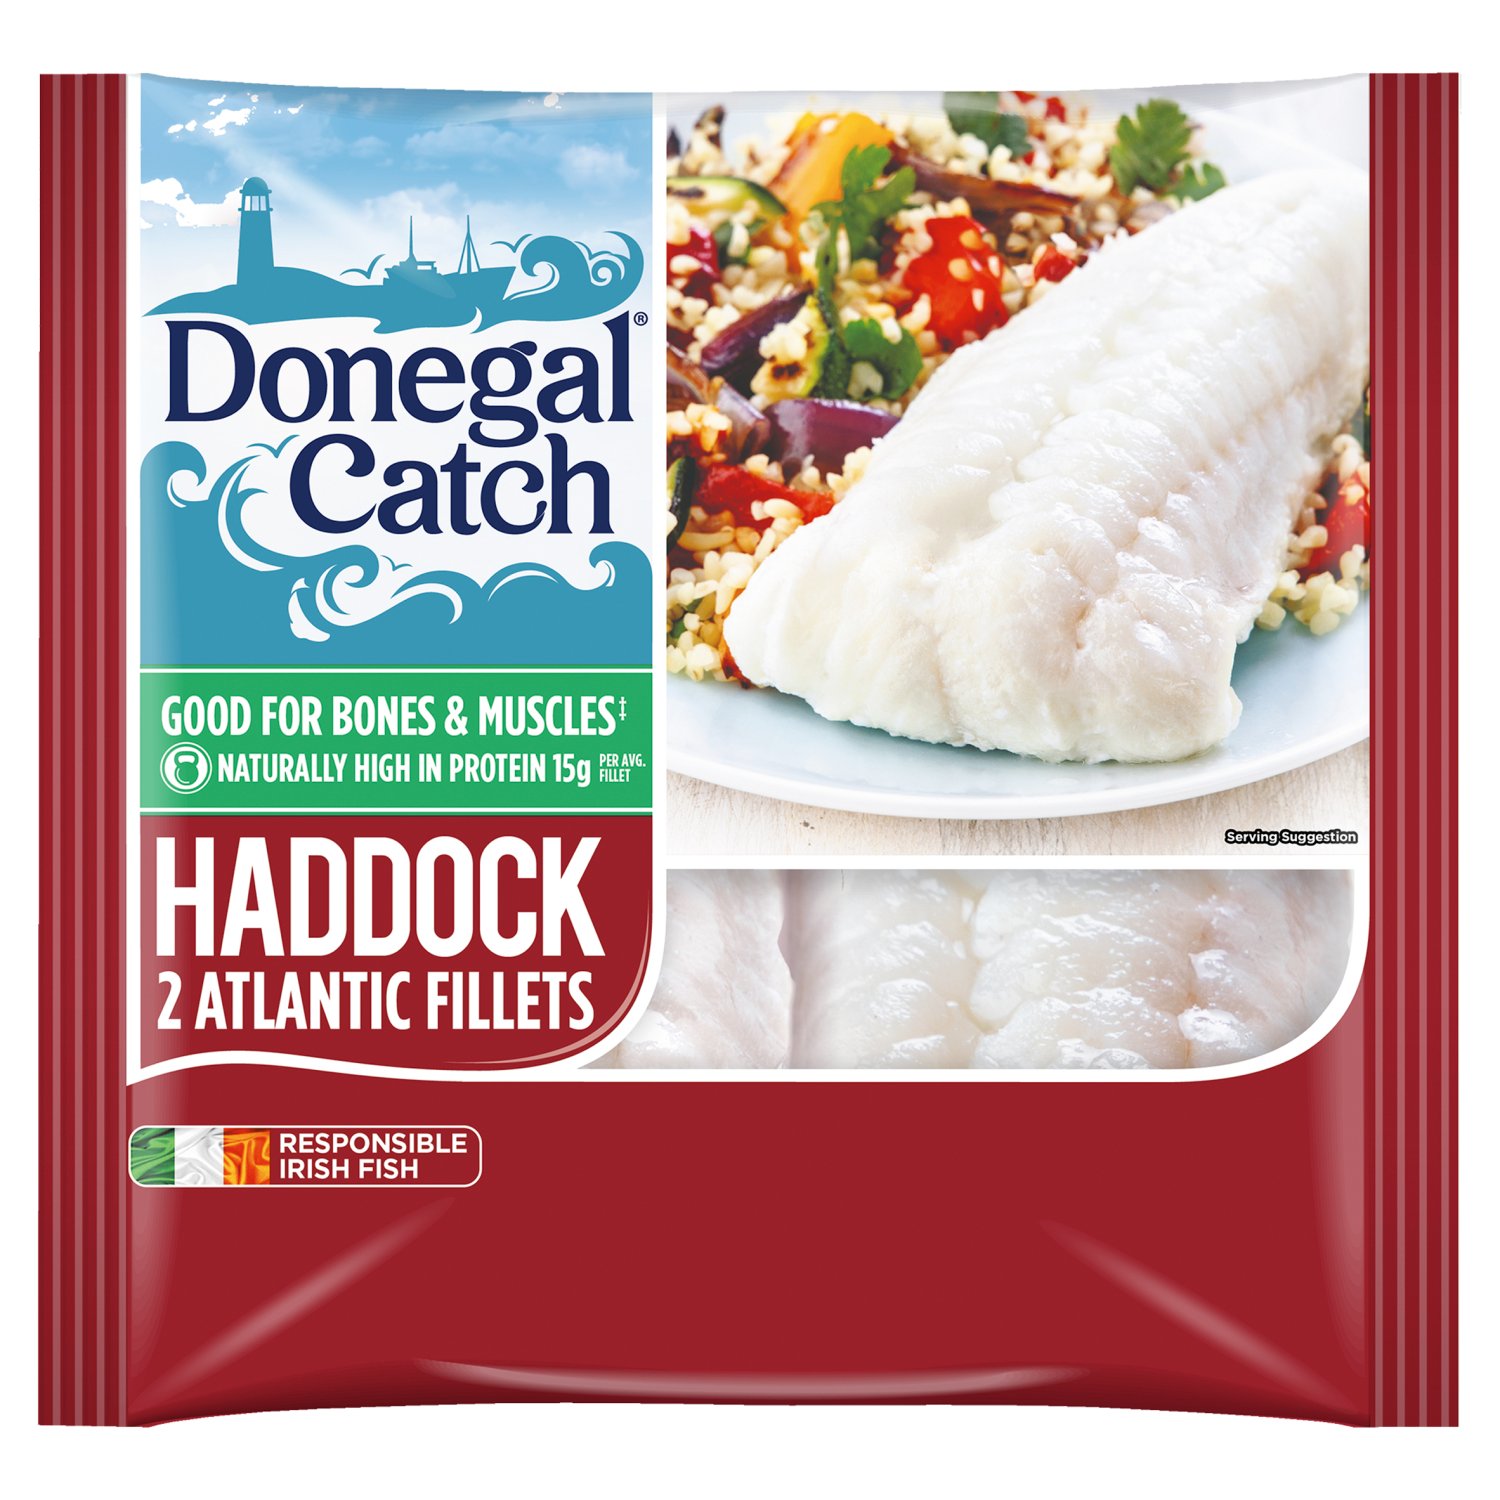 Good for bones & muscles‡
‡ Protein contributes to growth in muscle mass and helps to maintain normal bones.

Vitamin B12 helps reduce tiredness
Omega 3 helps normal function of the heart

Haddock has a sweeter and fuller flavour than other white fish.